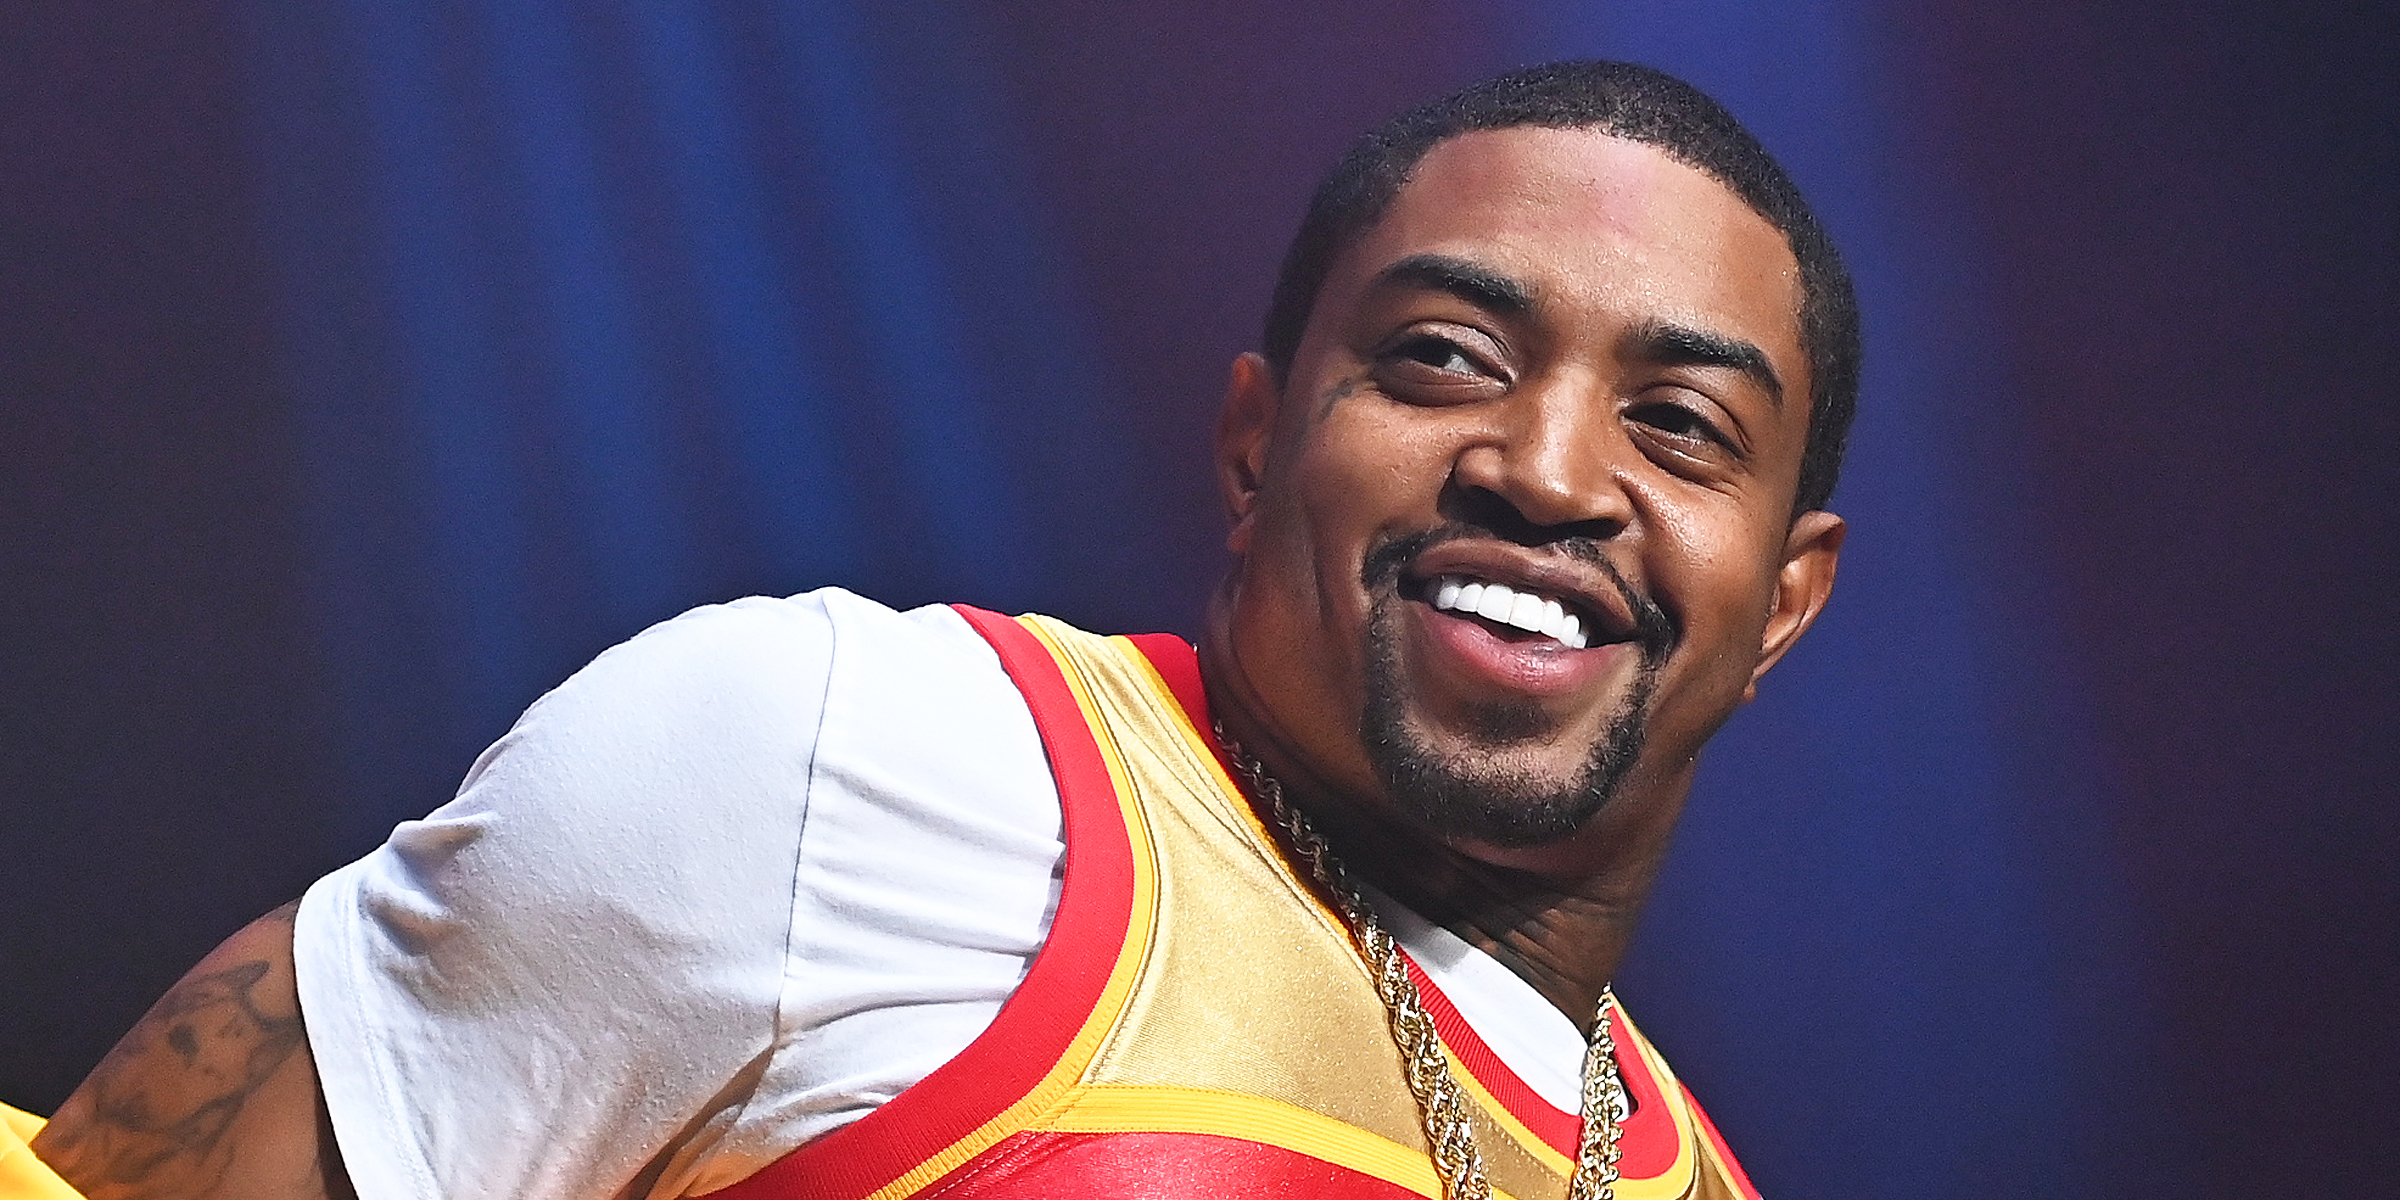 Lil Scrappy | Source: Getty Images